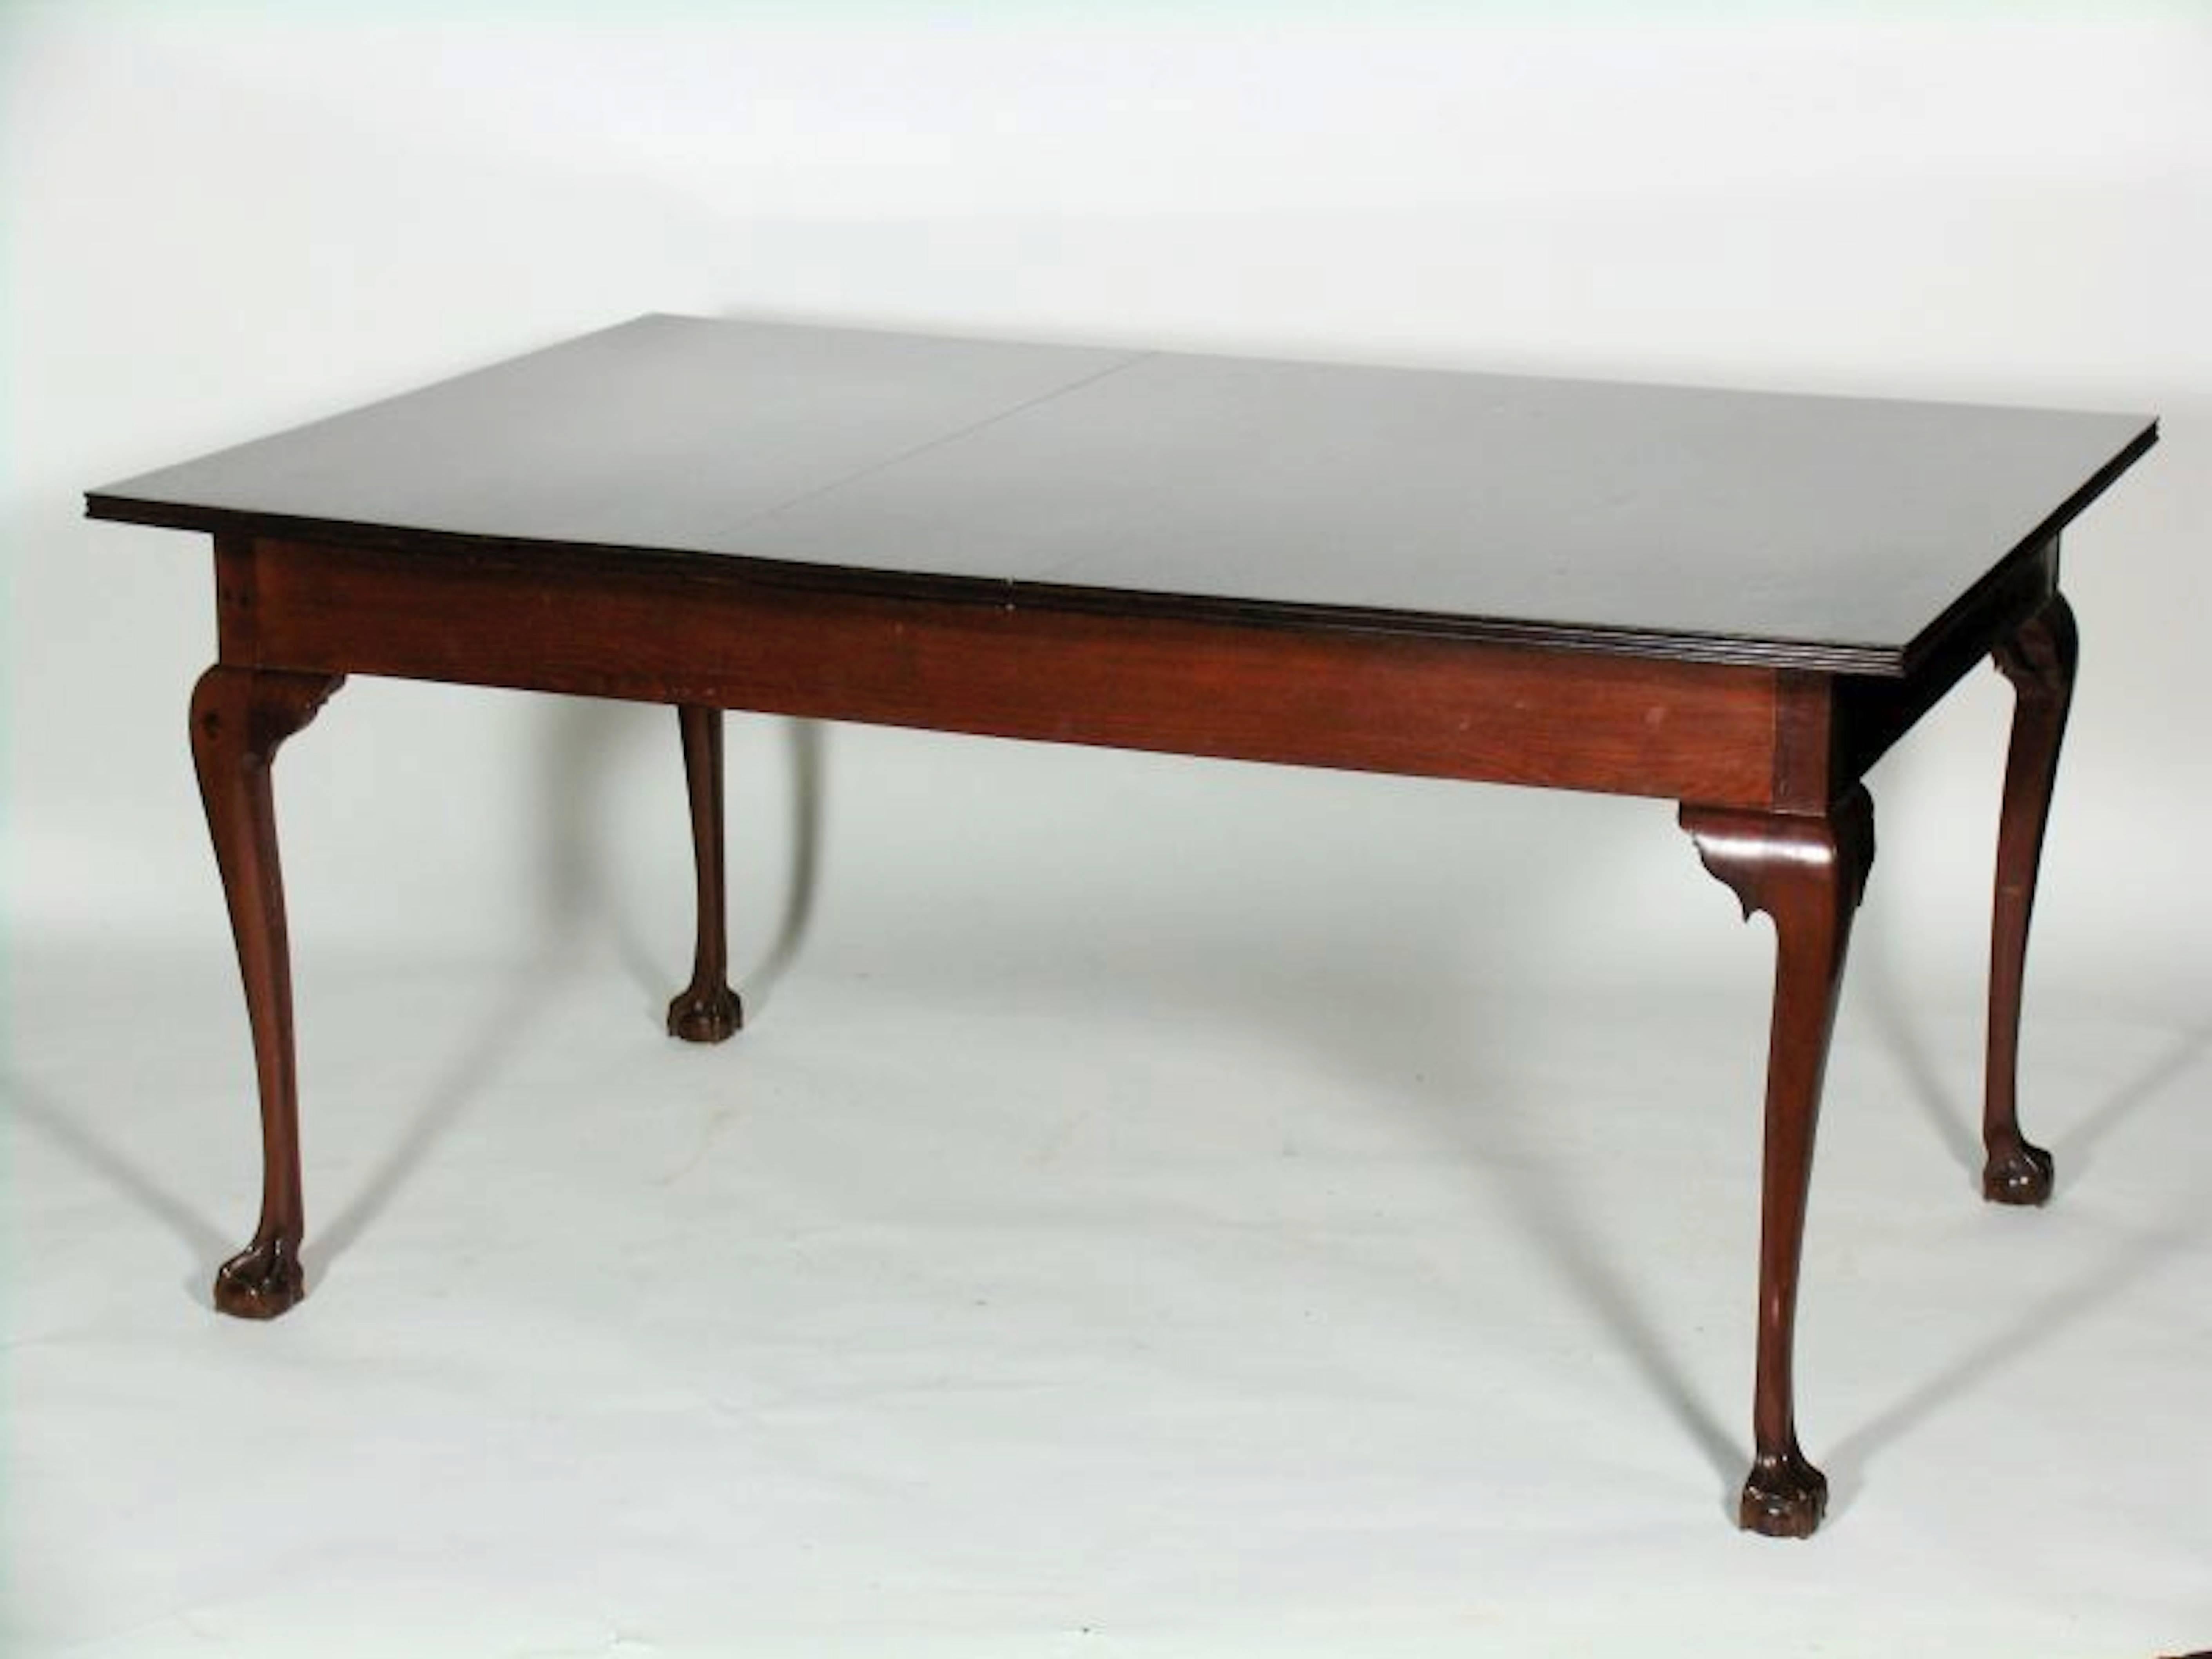 Solid rosewood and mahogany Dining table. Early 19th. Century.
Made in the Cadiz area (Spain)

